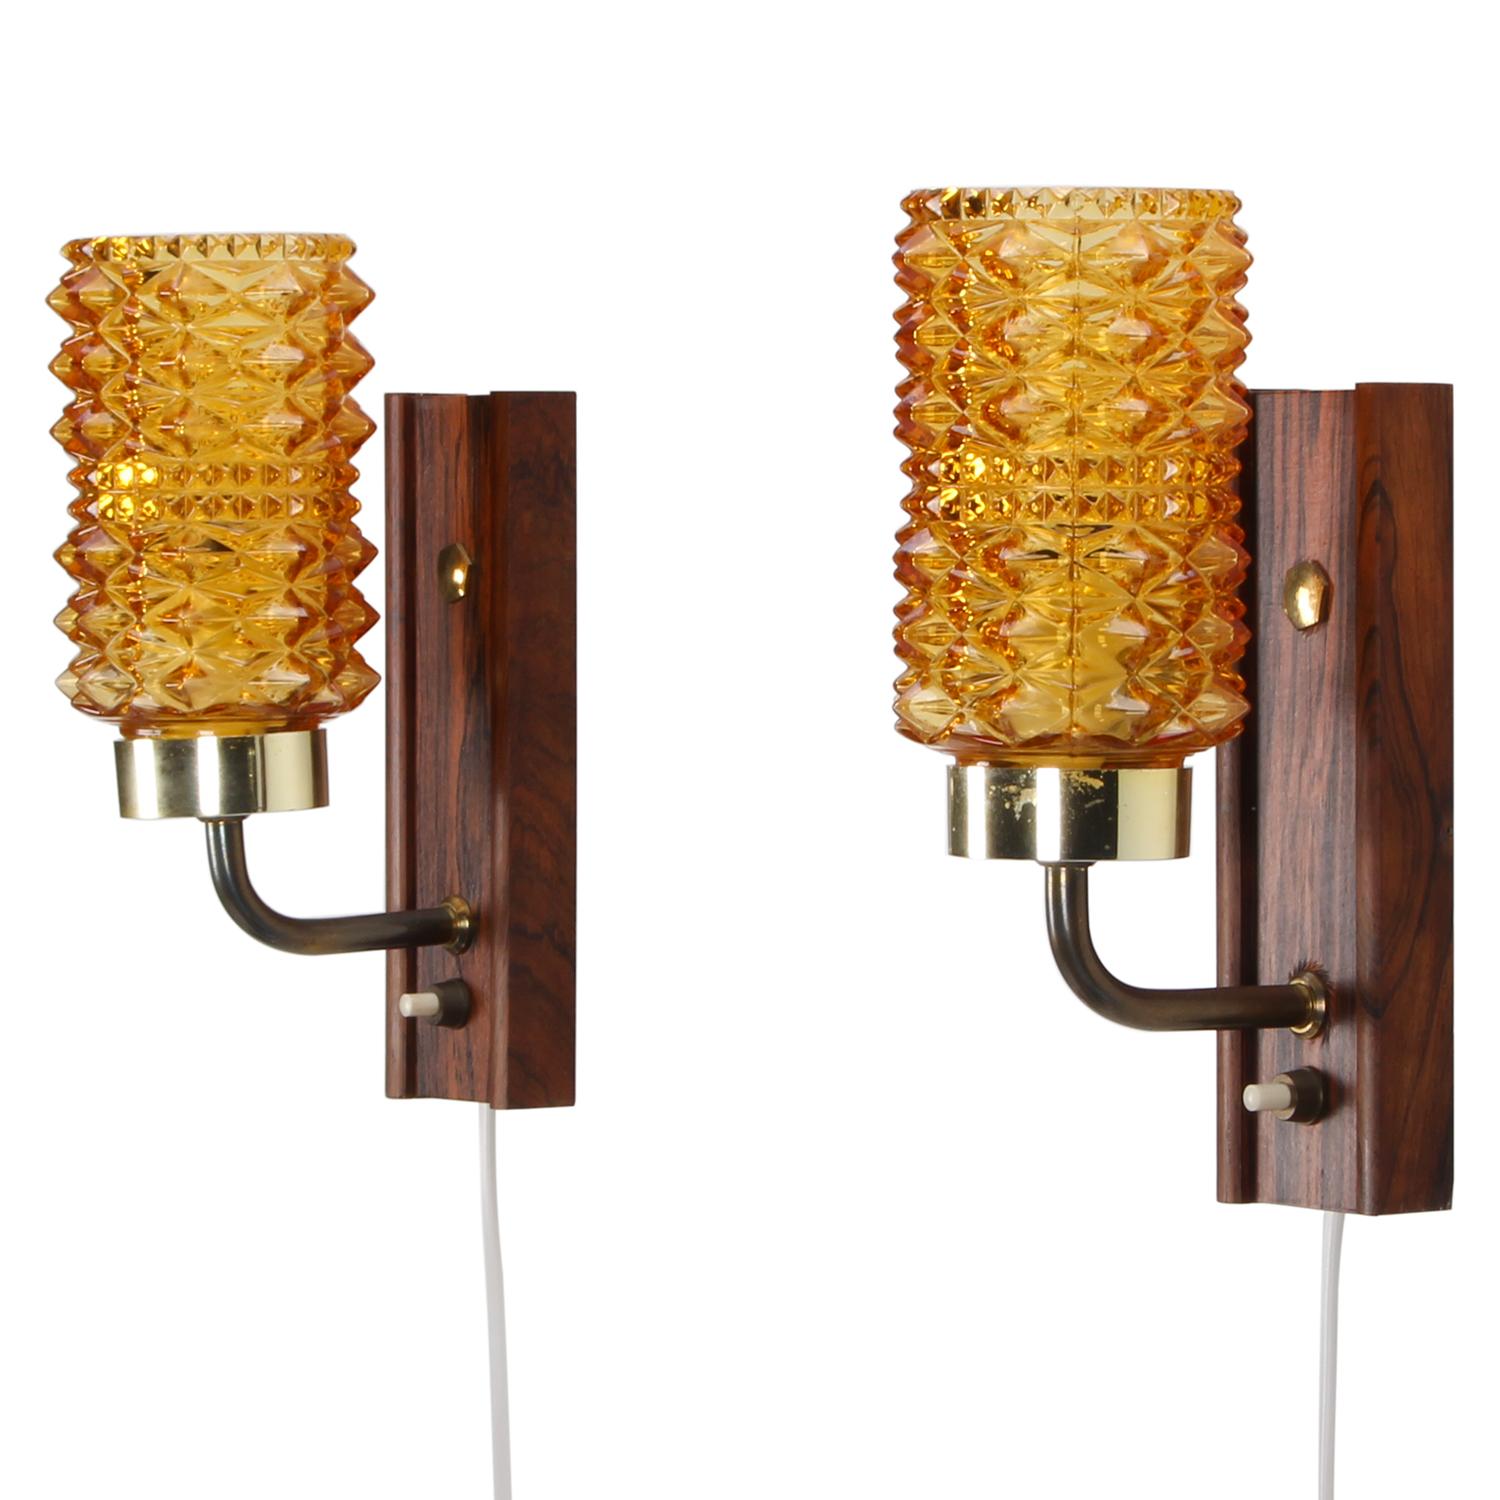 Lacquered Amber & Rosewood Wall Lamps Pair, 1950s Danish Vintage Wall Lights